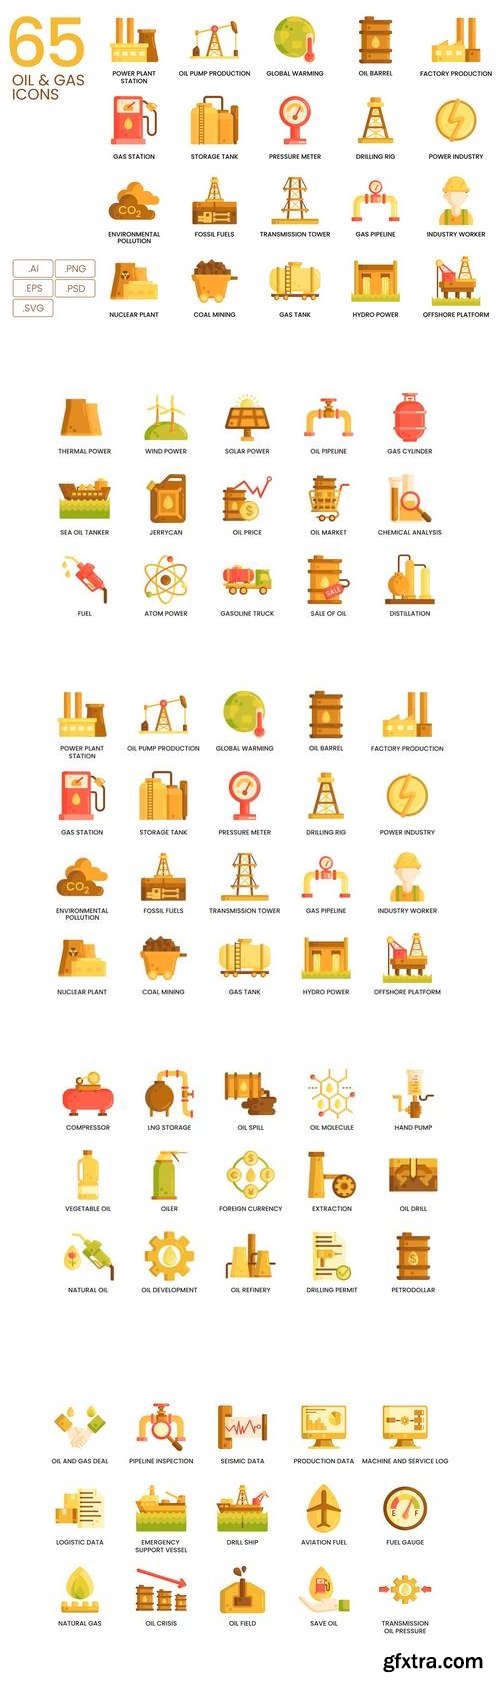 65 Oil & Gas Icons | Caramel Series